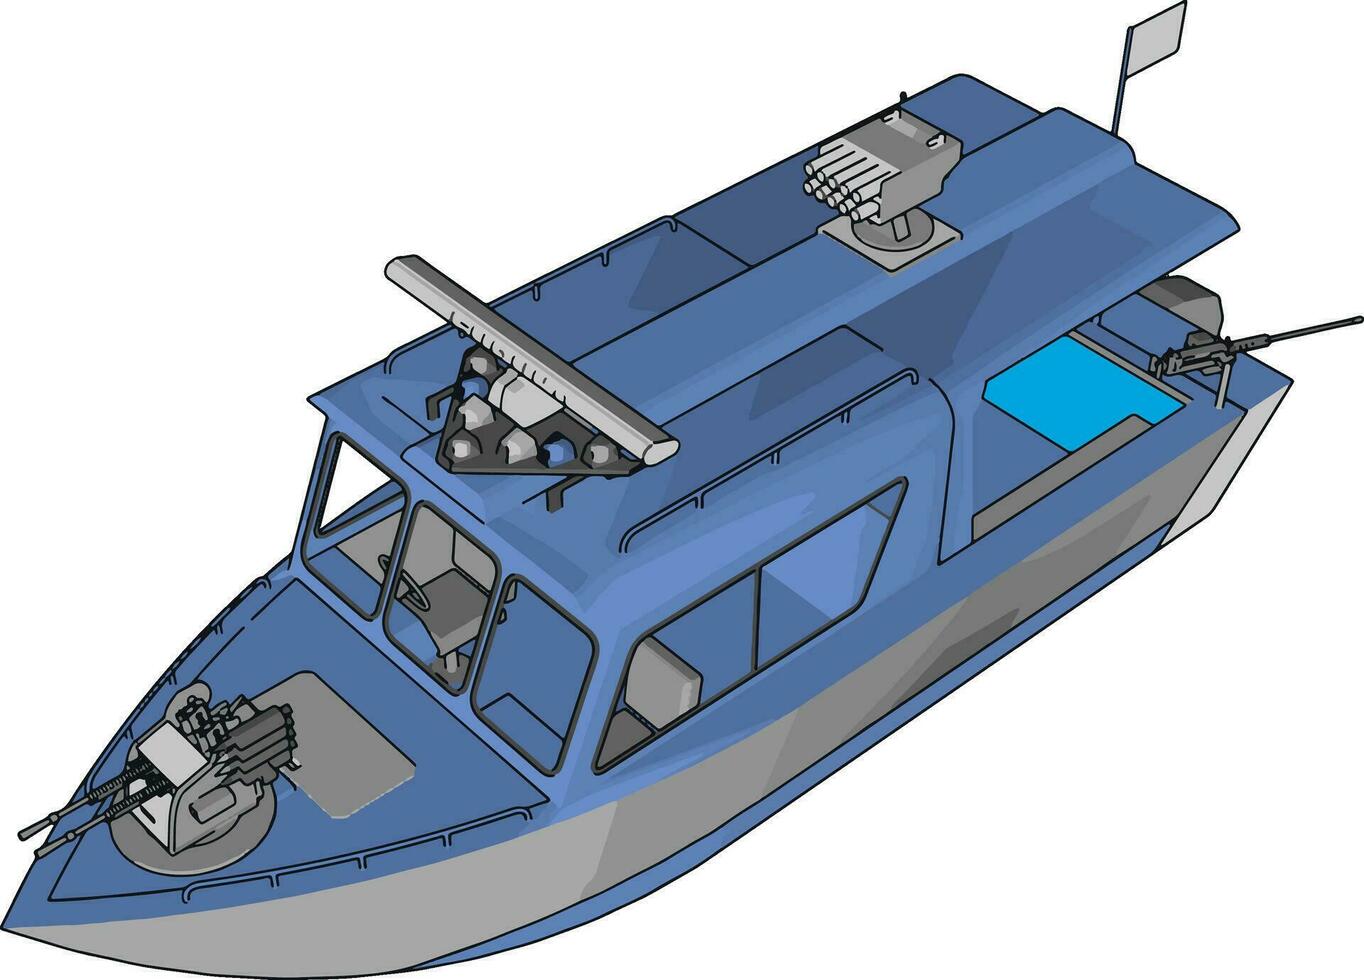 3D vector illustration on white background of a grey and blue military boat